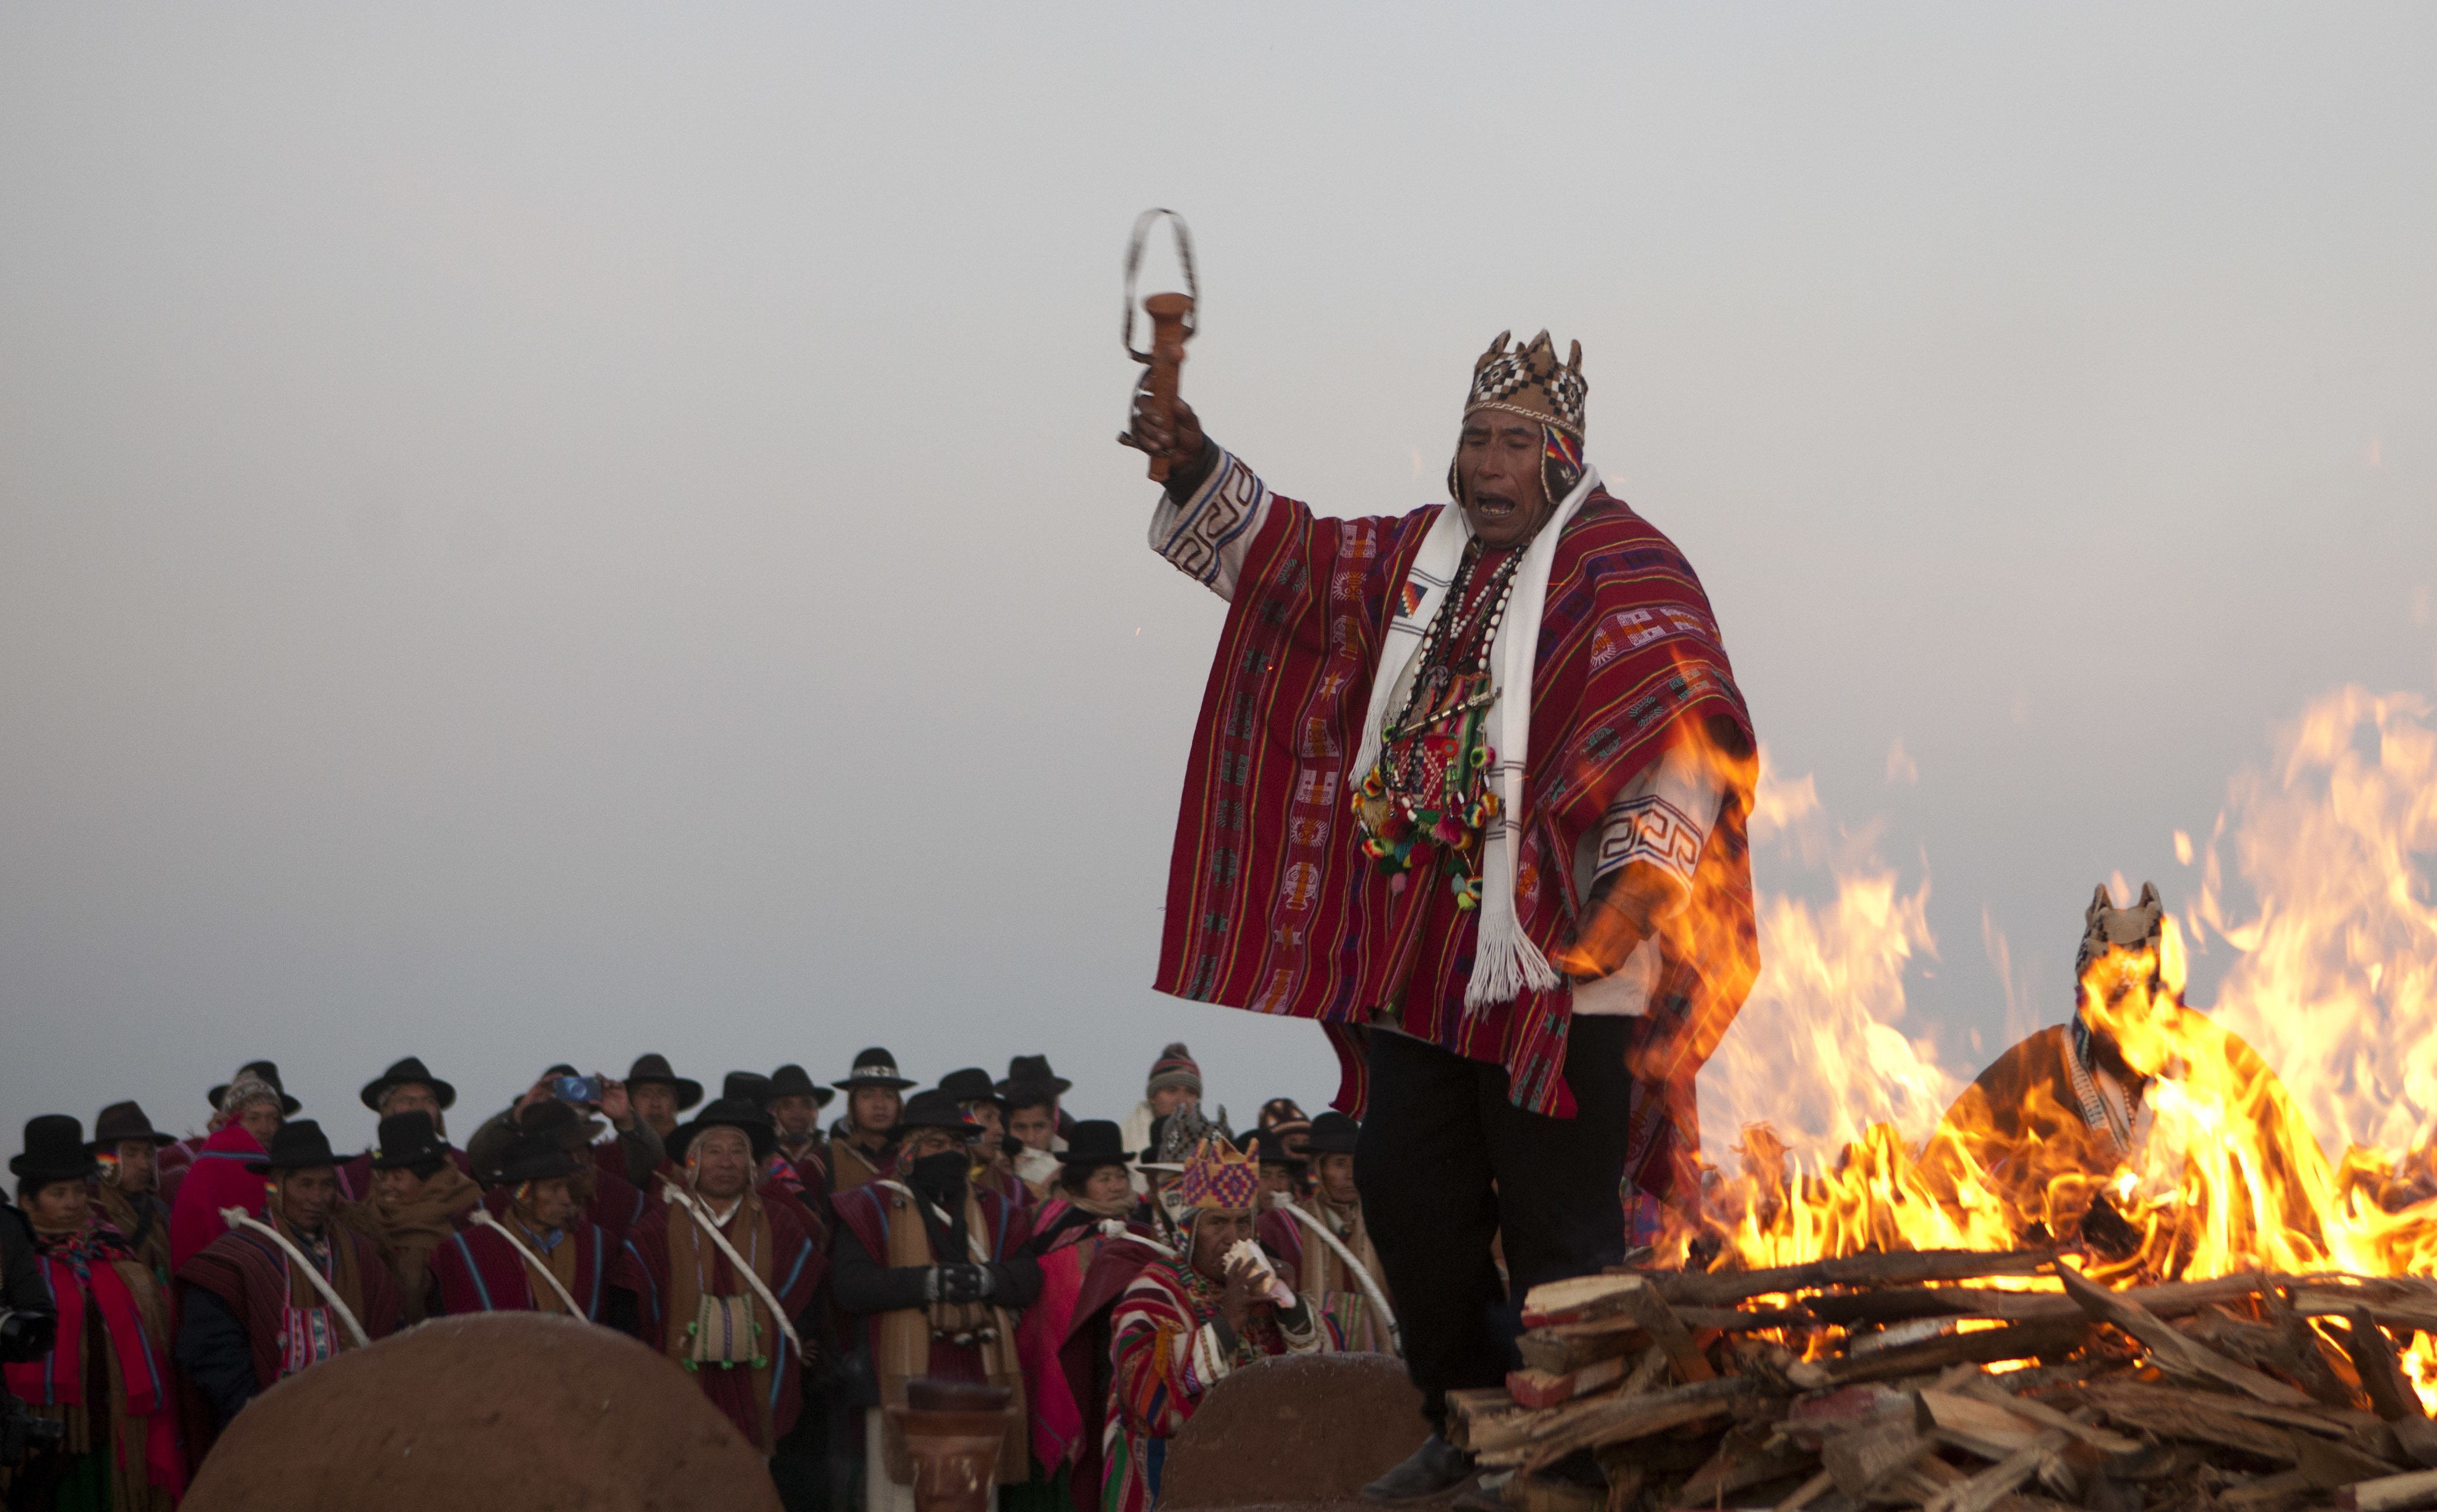 Andean religious leaders perform a New Year's ritual at the ruins of the ancient civilization of Tiwanaku, Bolivia, early Wednesday, June 21, 2017. Bolivia's Aymara Indians are celebrating the year 5,525 as well as the Southern Hemisphere's winter solstice, which marks the start of a new agricultural cycle. (AP Photo/Juan Karita)